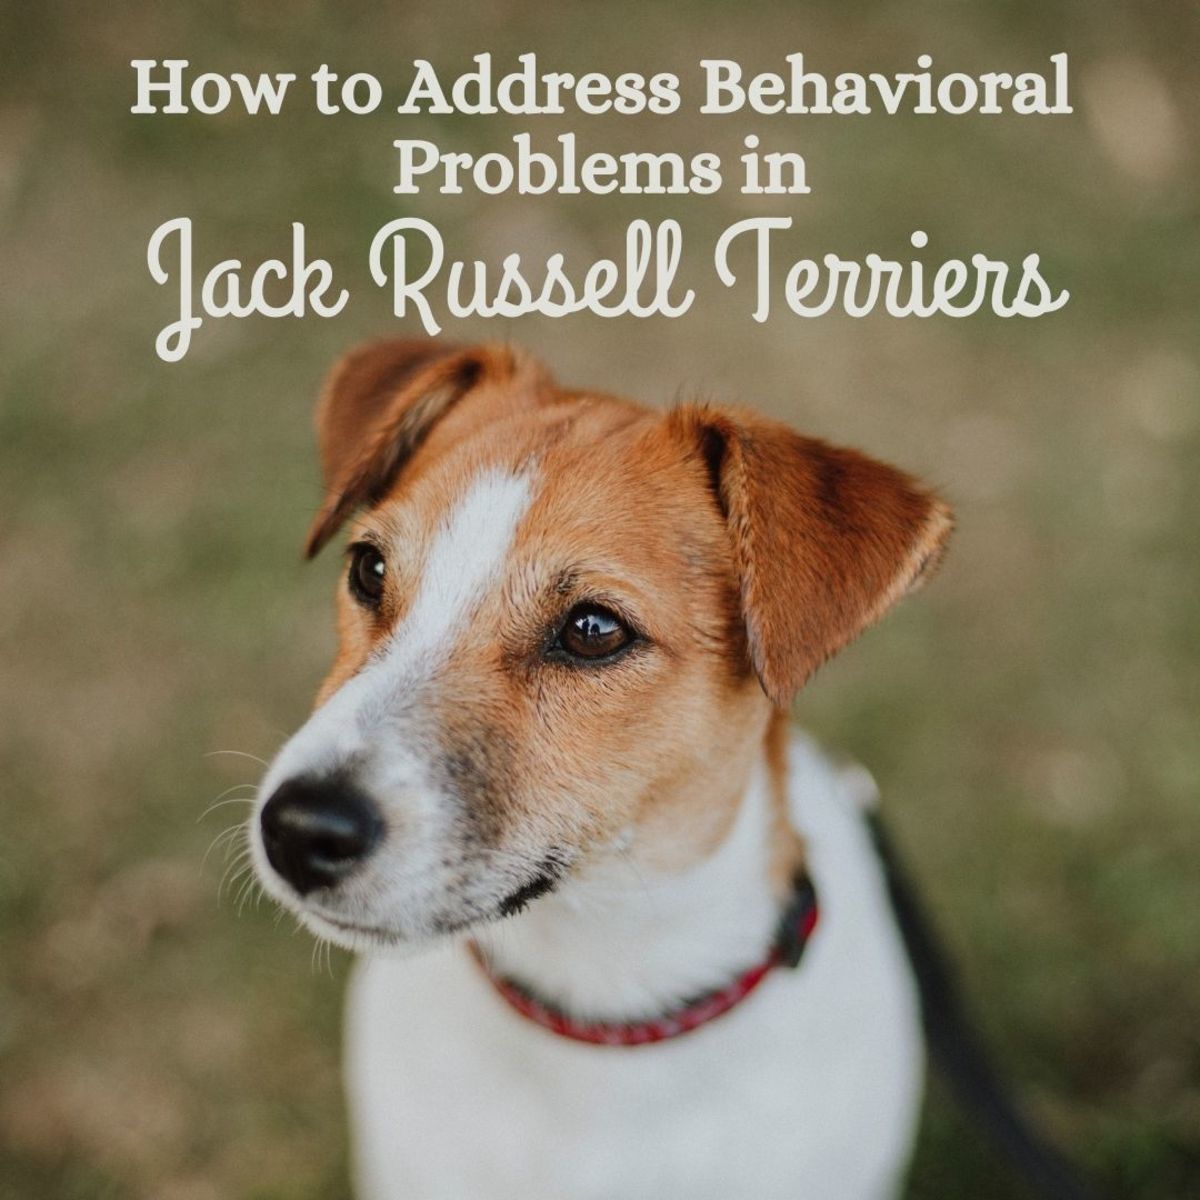 7 Common Jack Russell Problem Behaviors and How to Fix Them